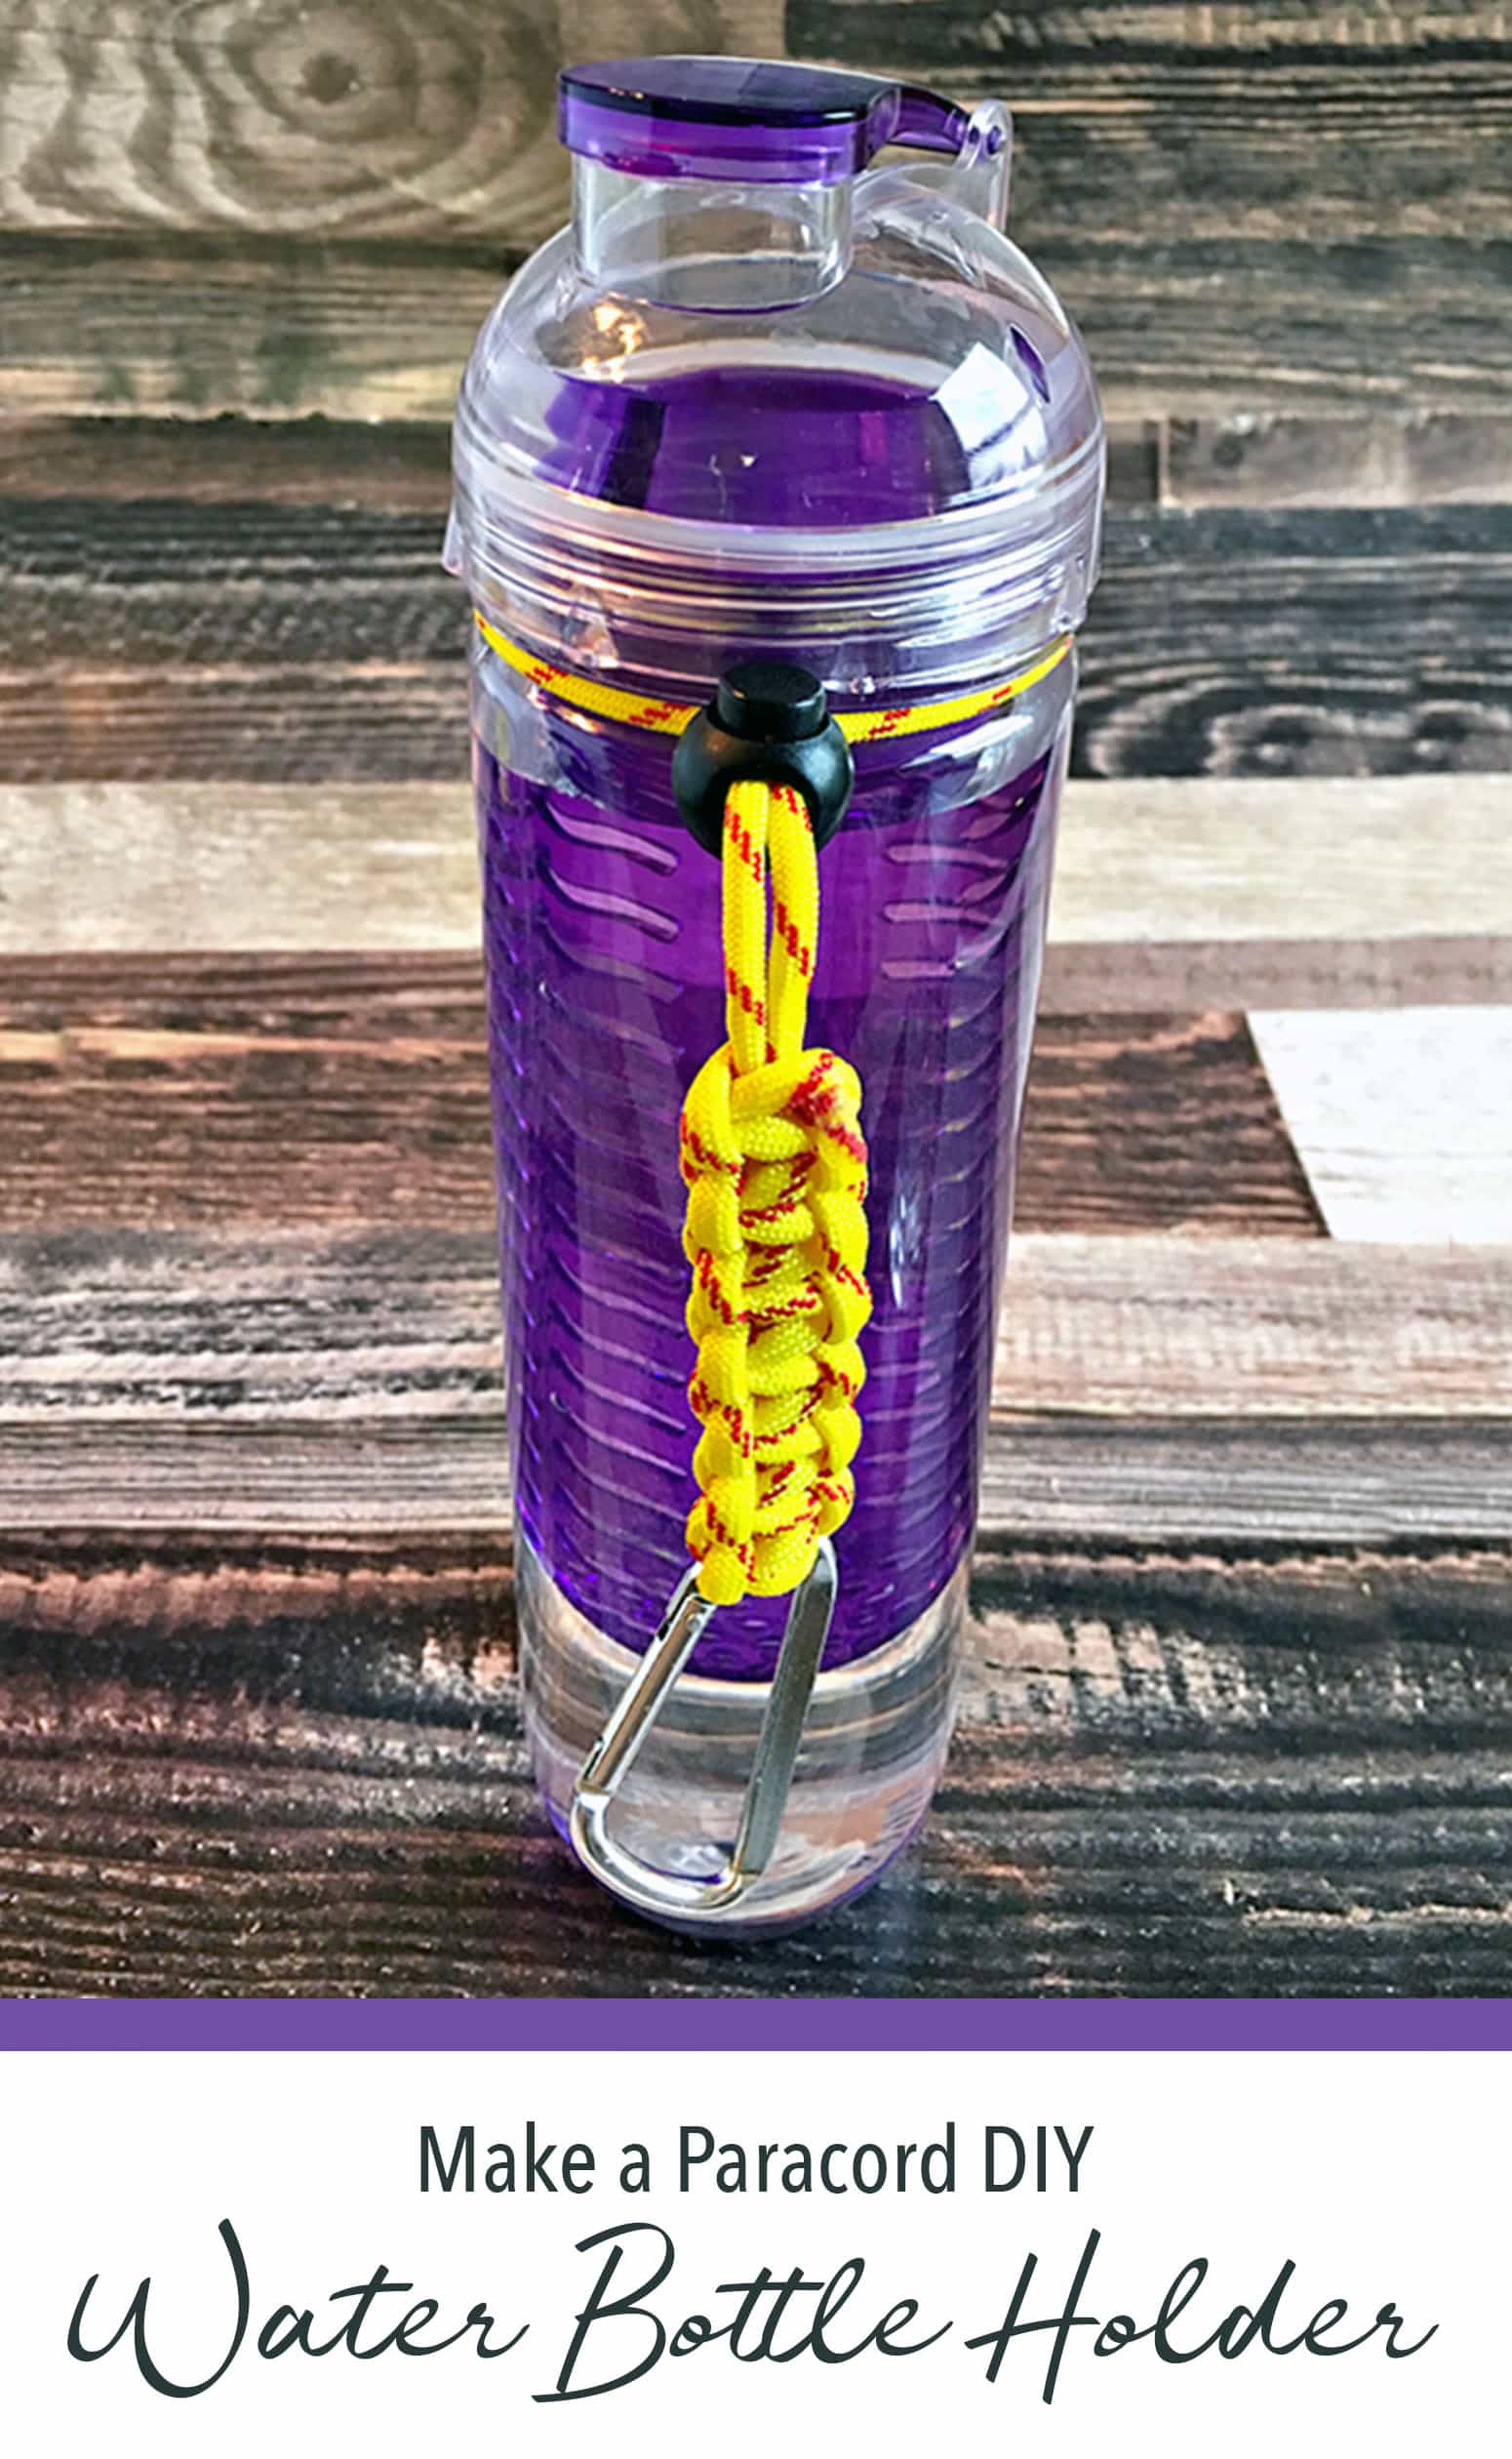 Yellow paracord bottle holder attached to purple reusable bottle, on wood table.